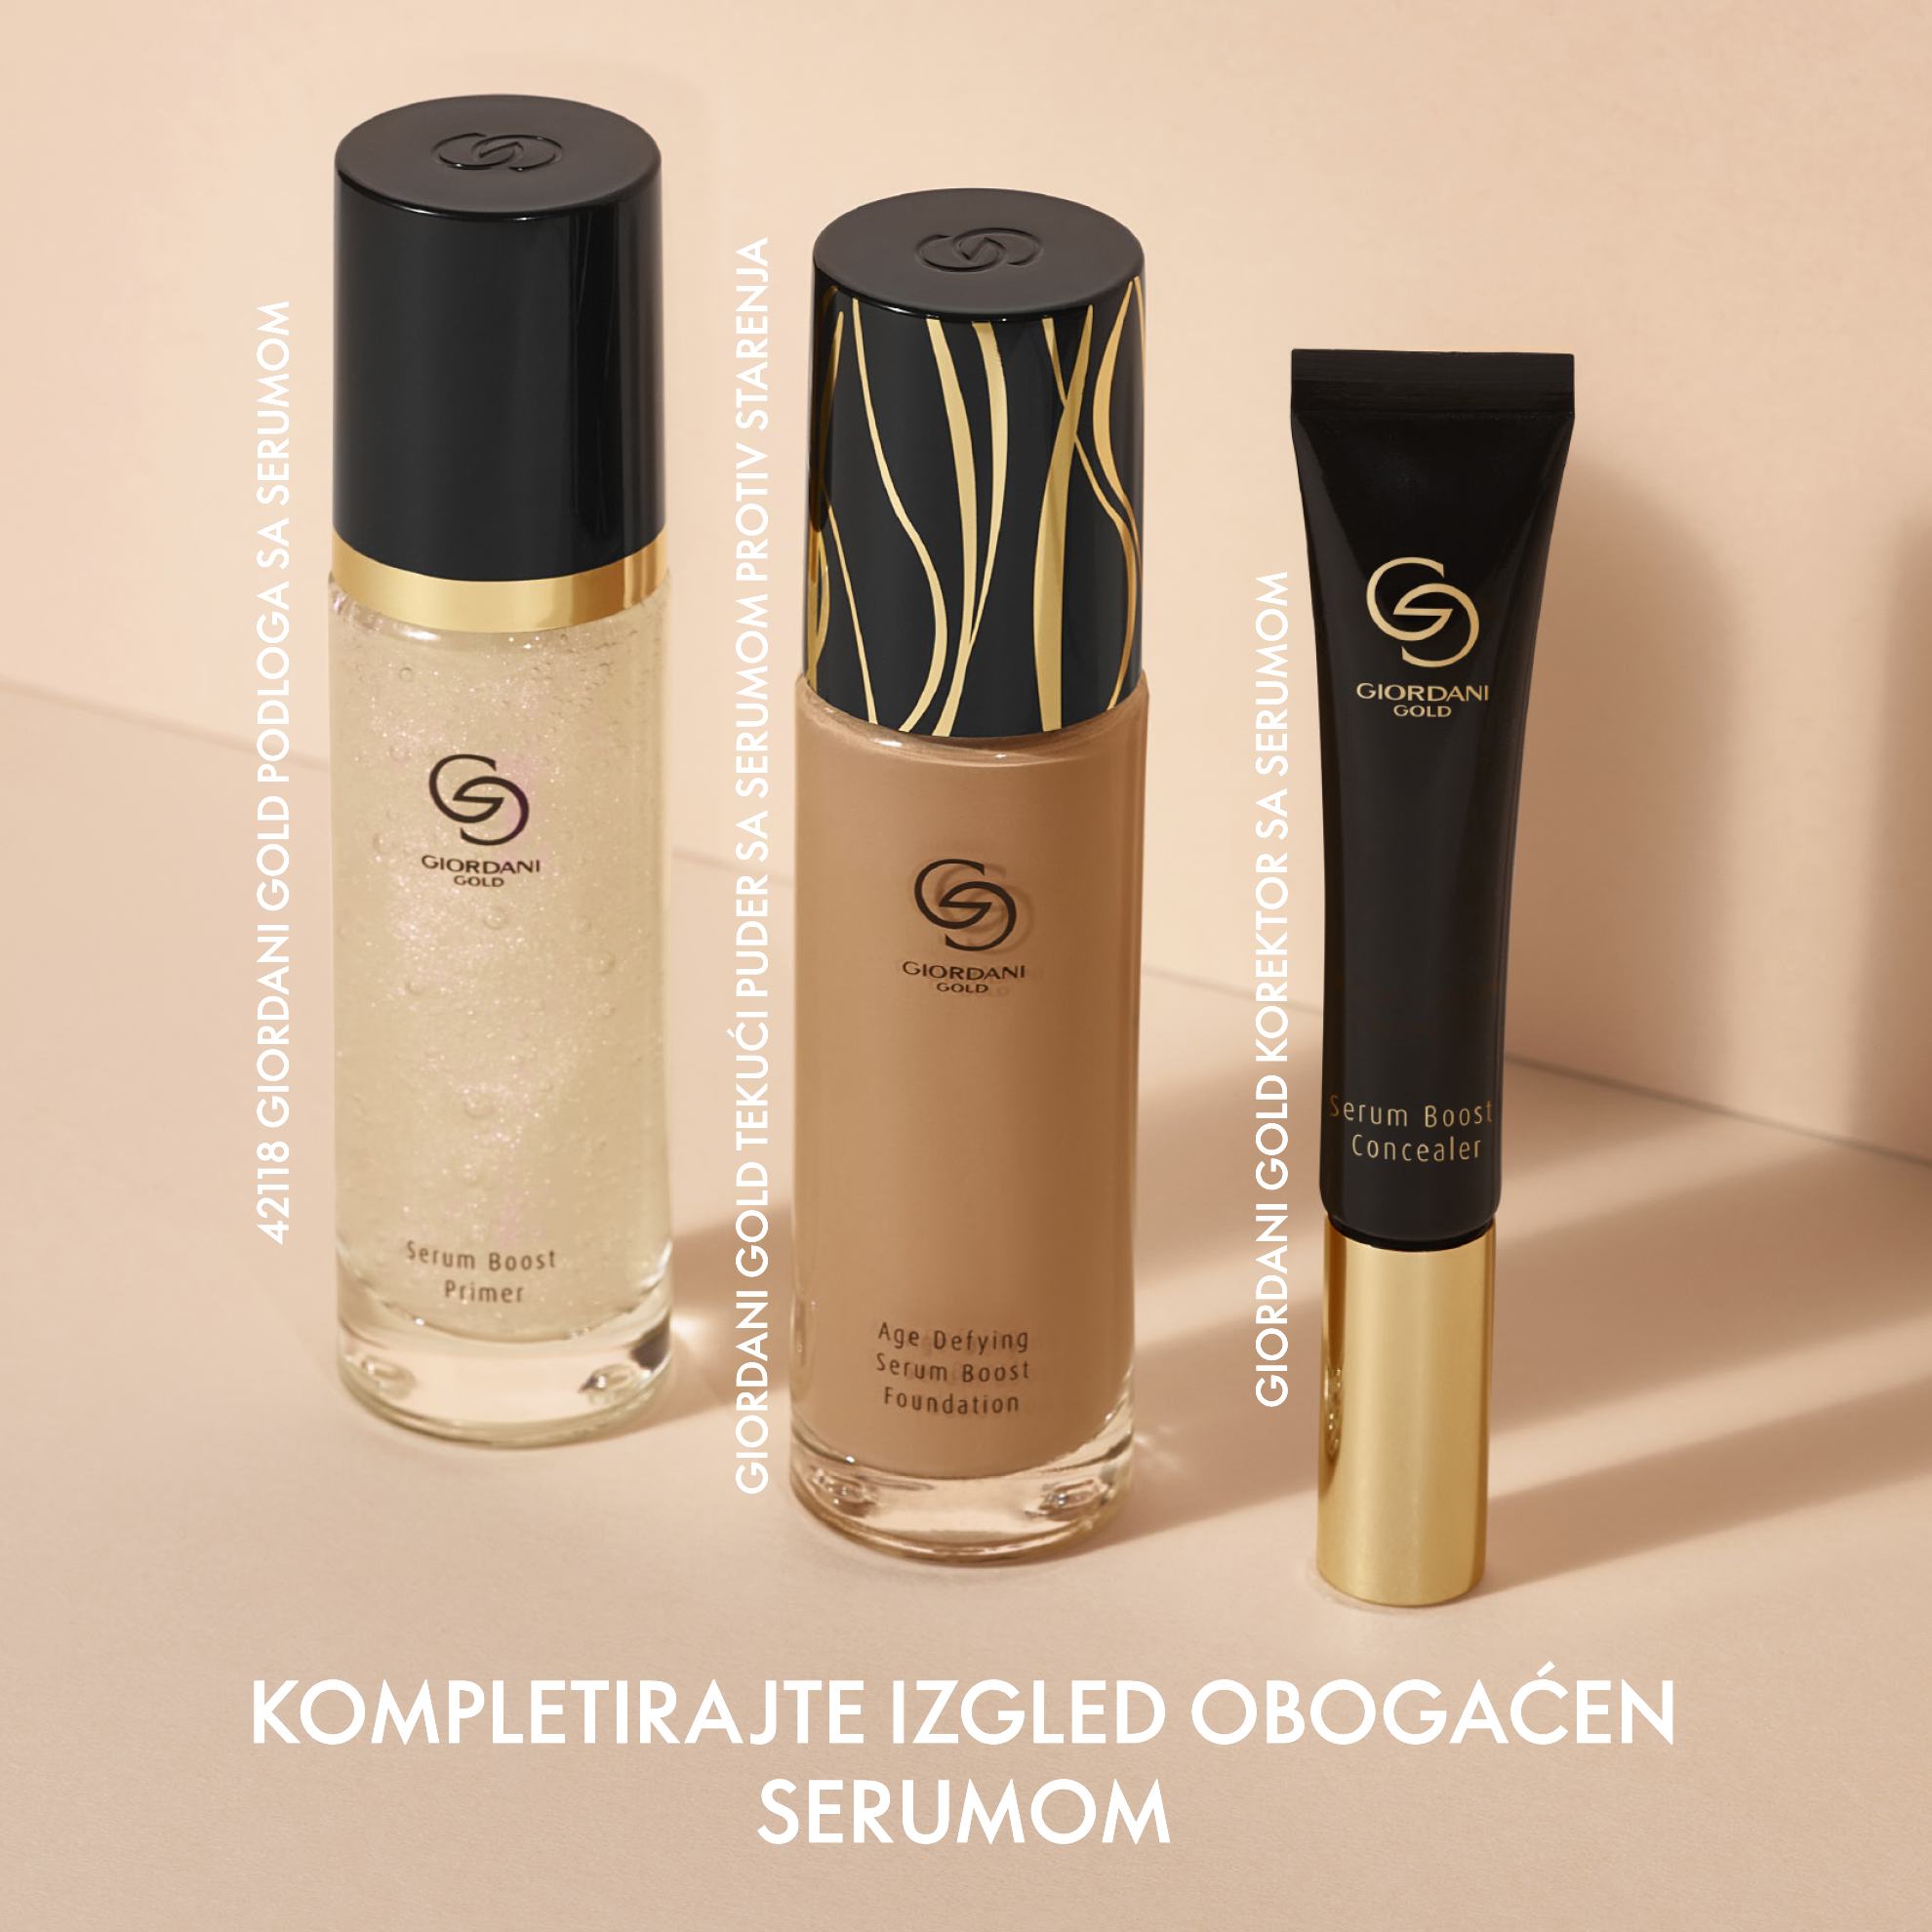 https://media-cdn.oriflame.com/productImage?externalMediaId=product-management-media%2fProducts%2f40954%2fBA%2f40954_7.png&id=16909582&version=1